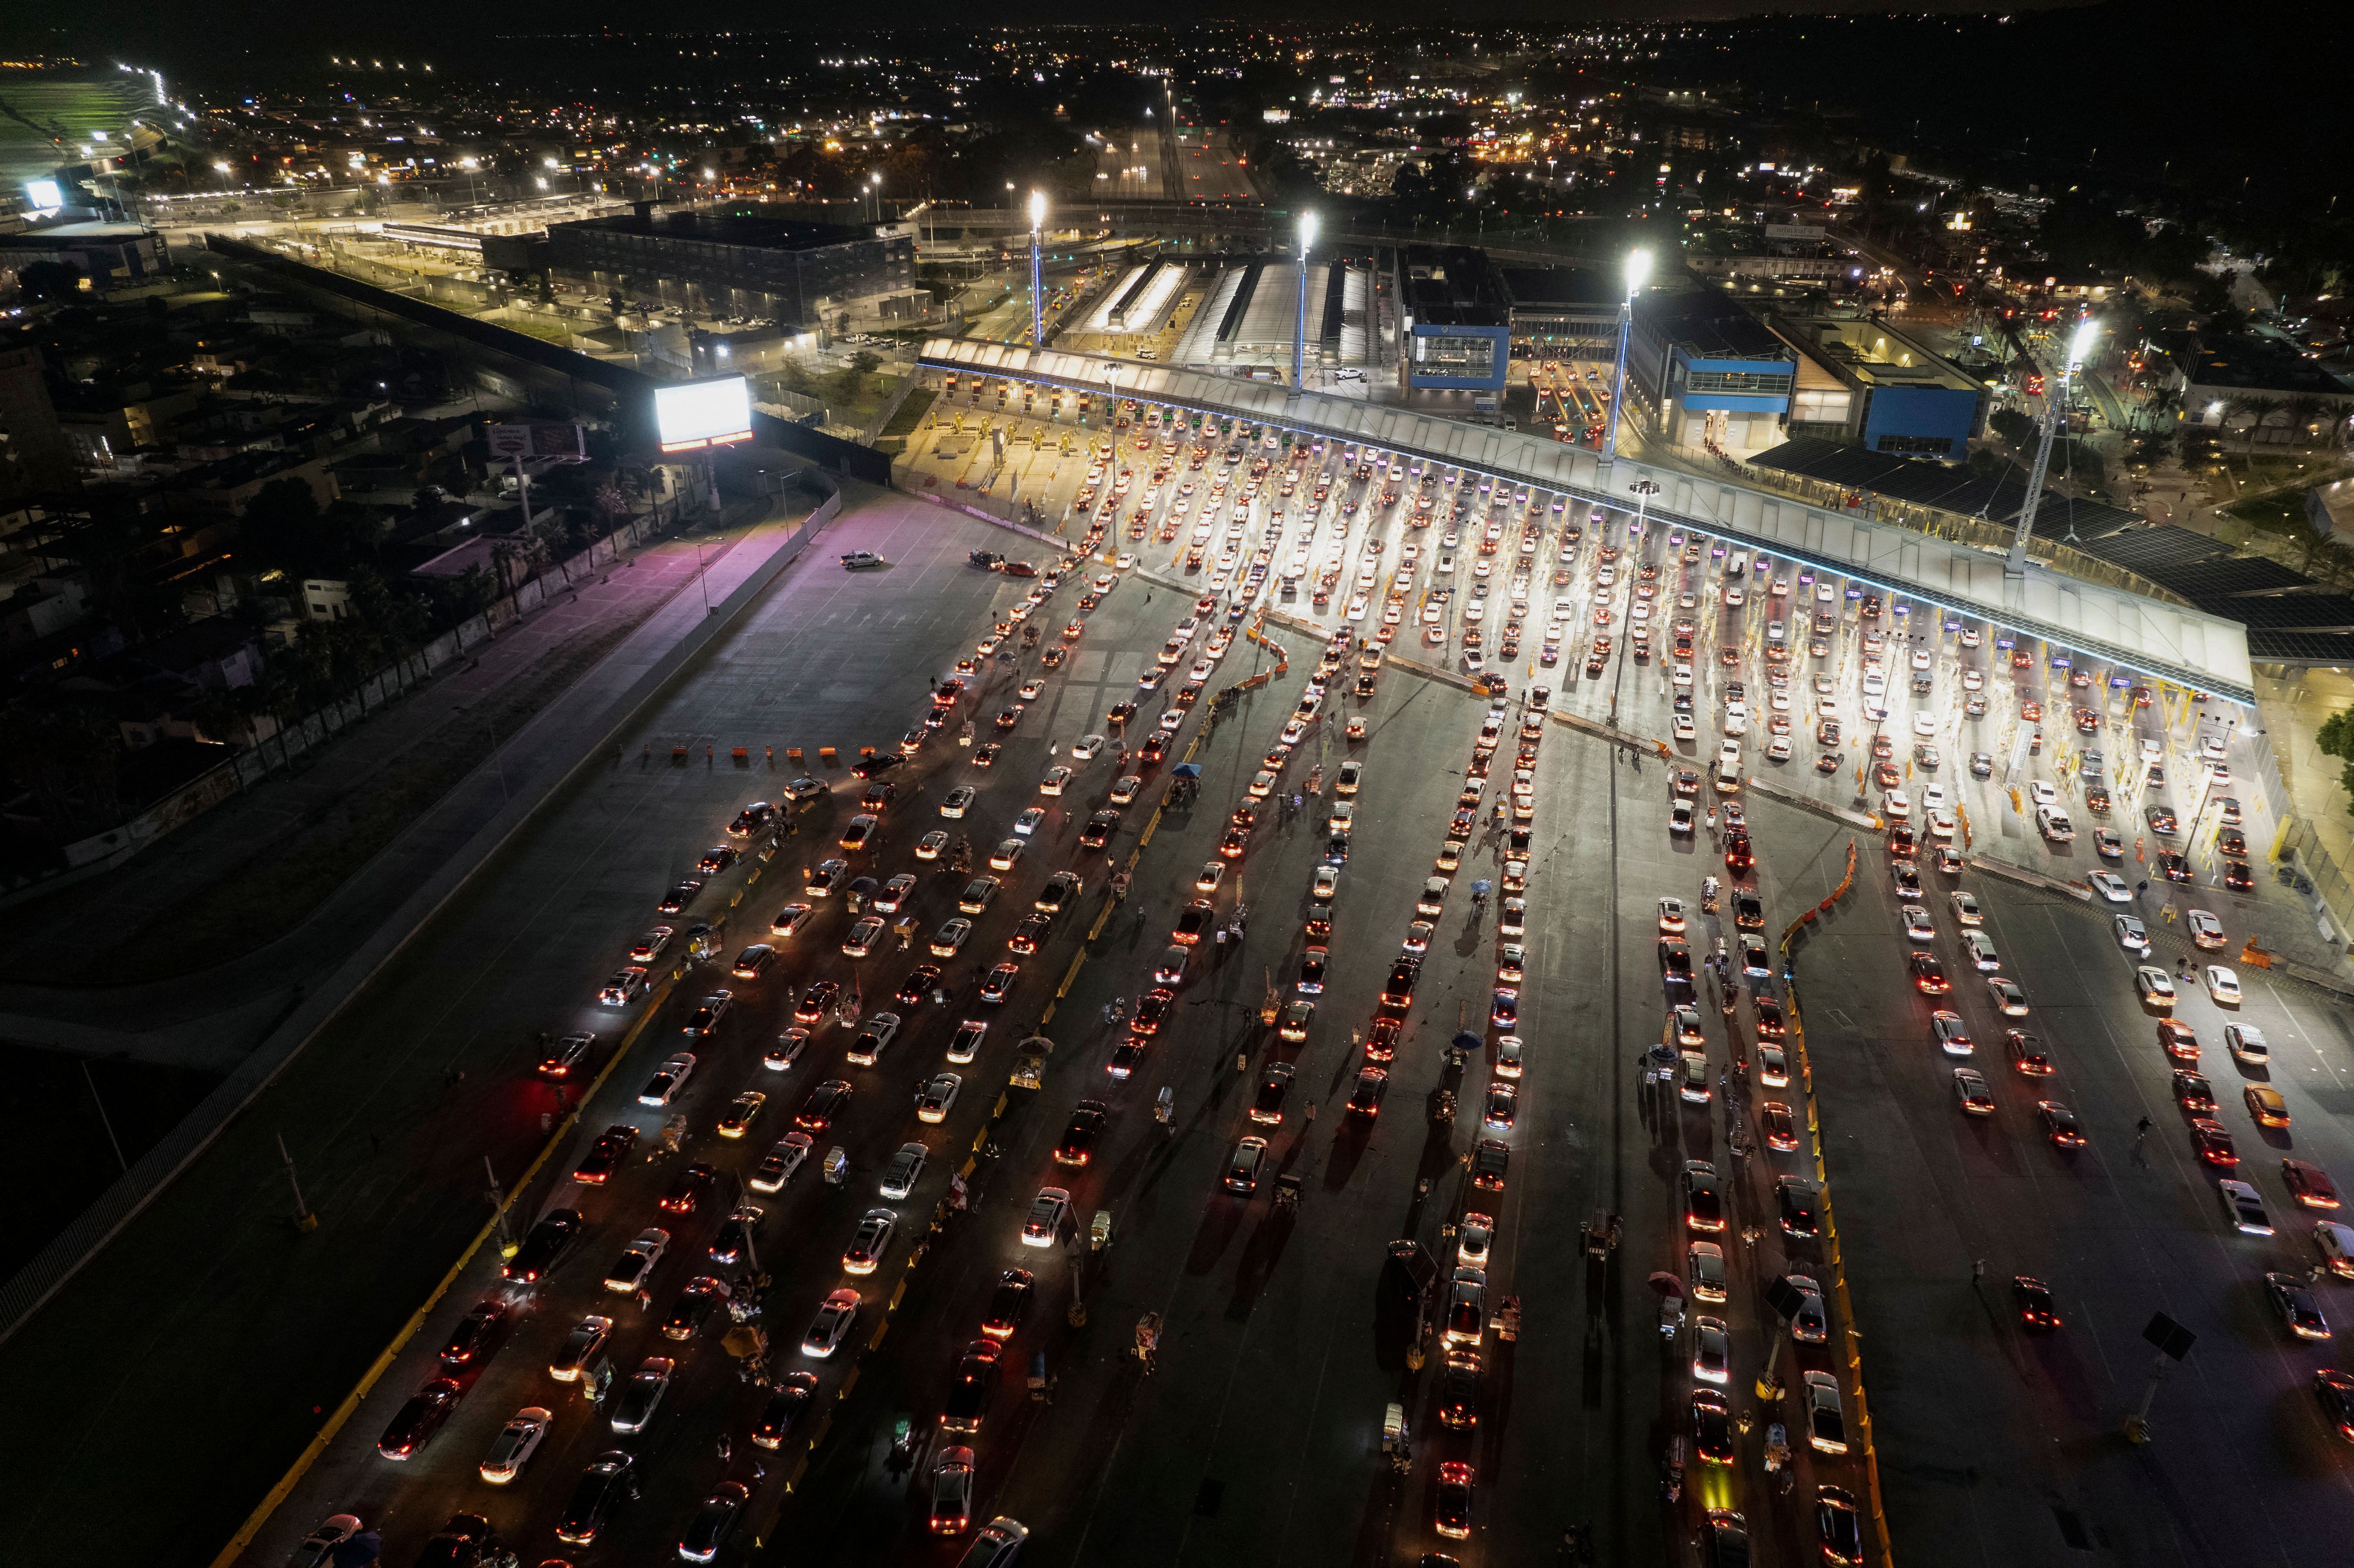  An aerial view of cars lining-up to cross the border at San Ysidro crossing port on the Mexico-United States border in Tijuana, Baja California state, Mexico, on November 7